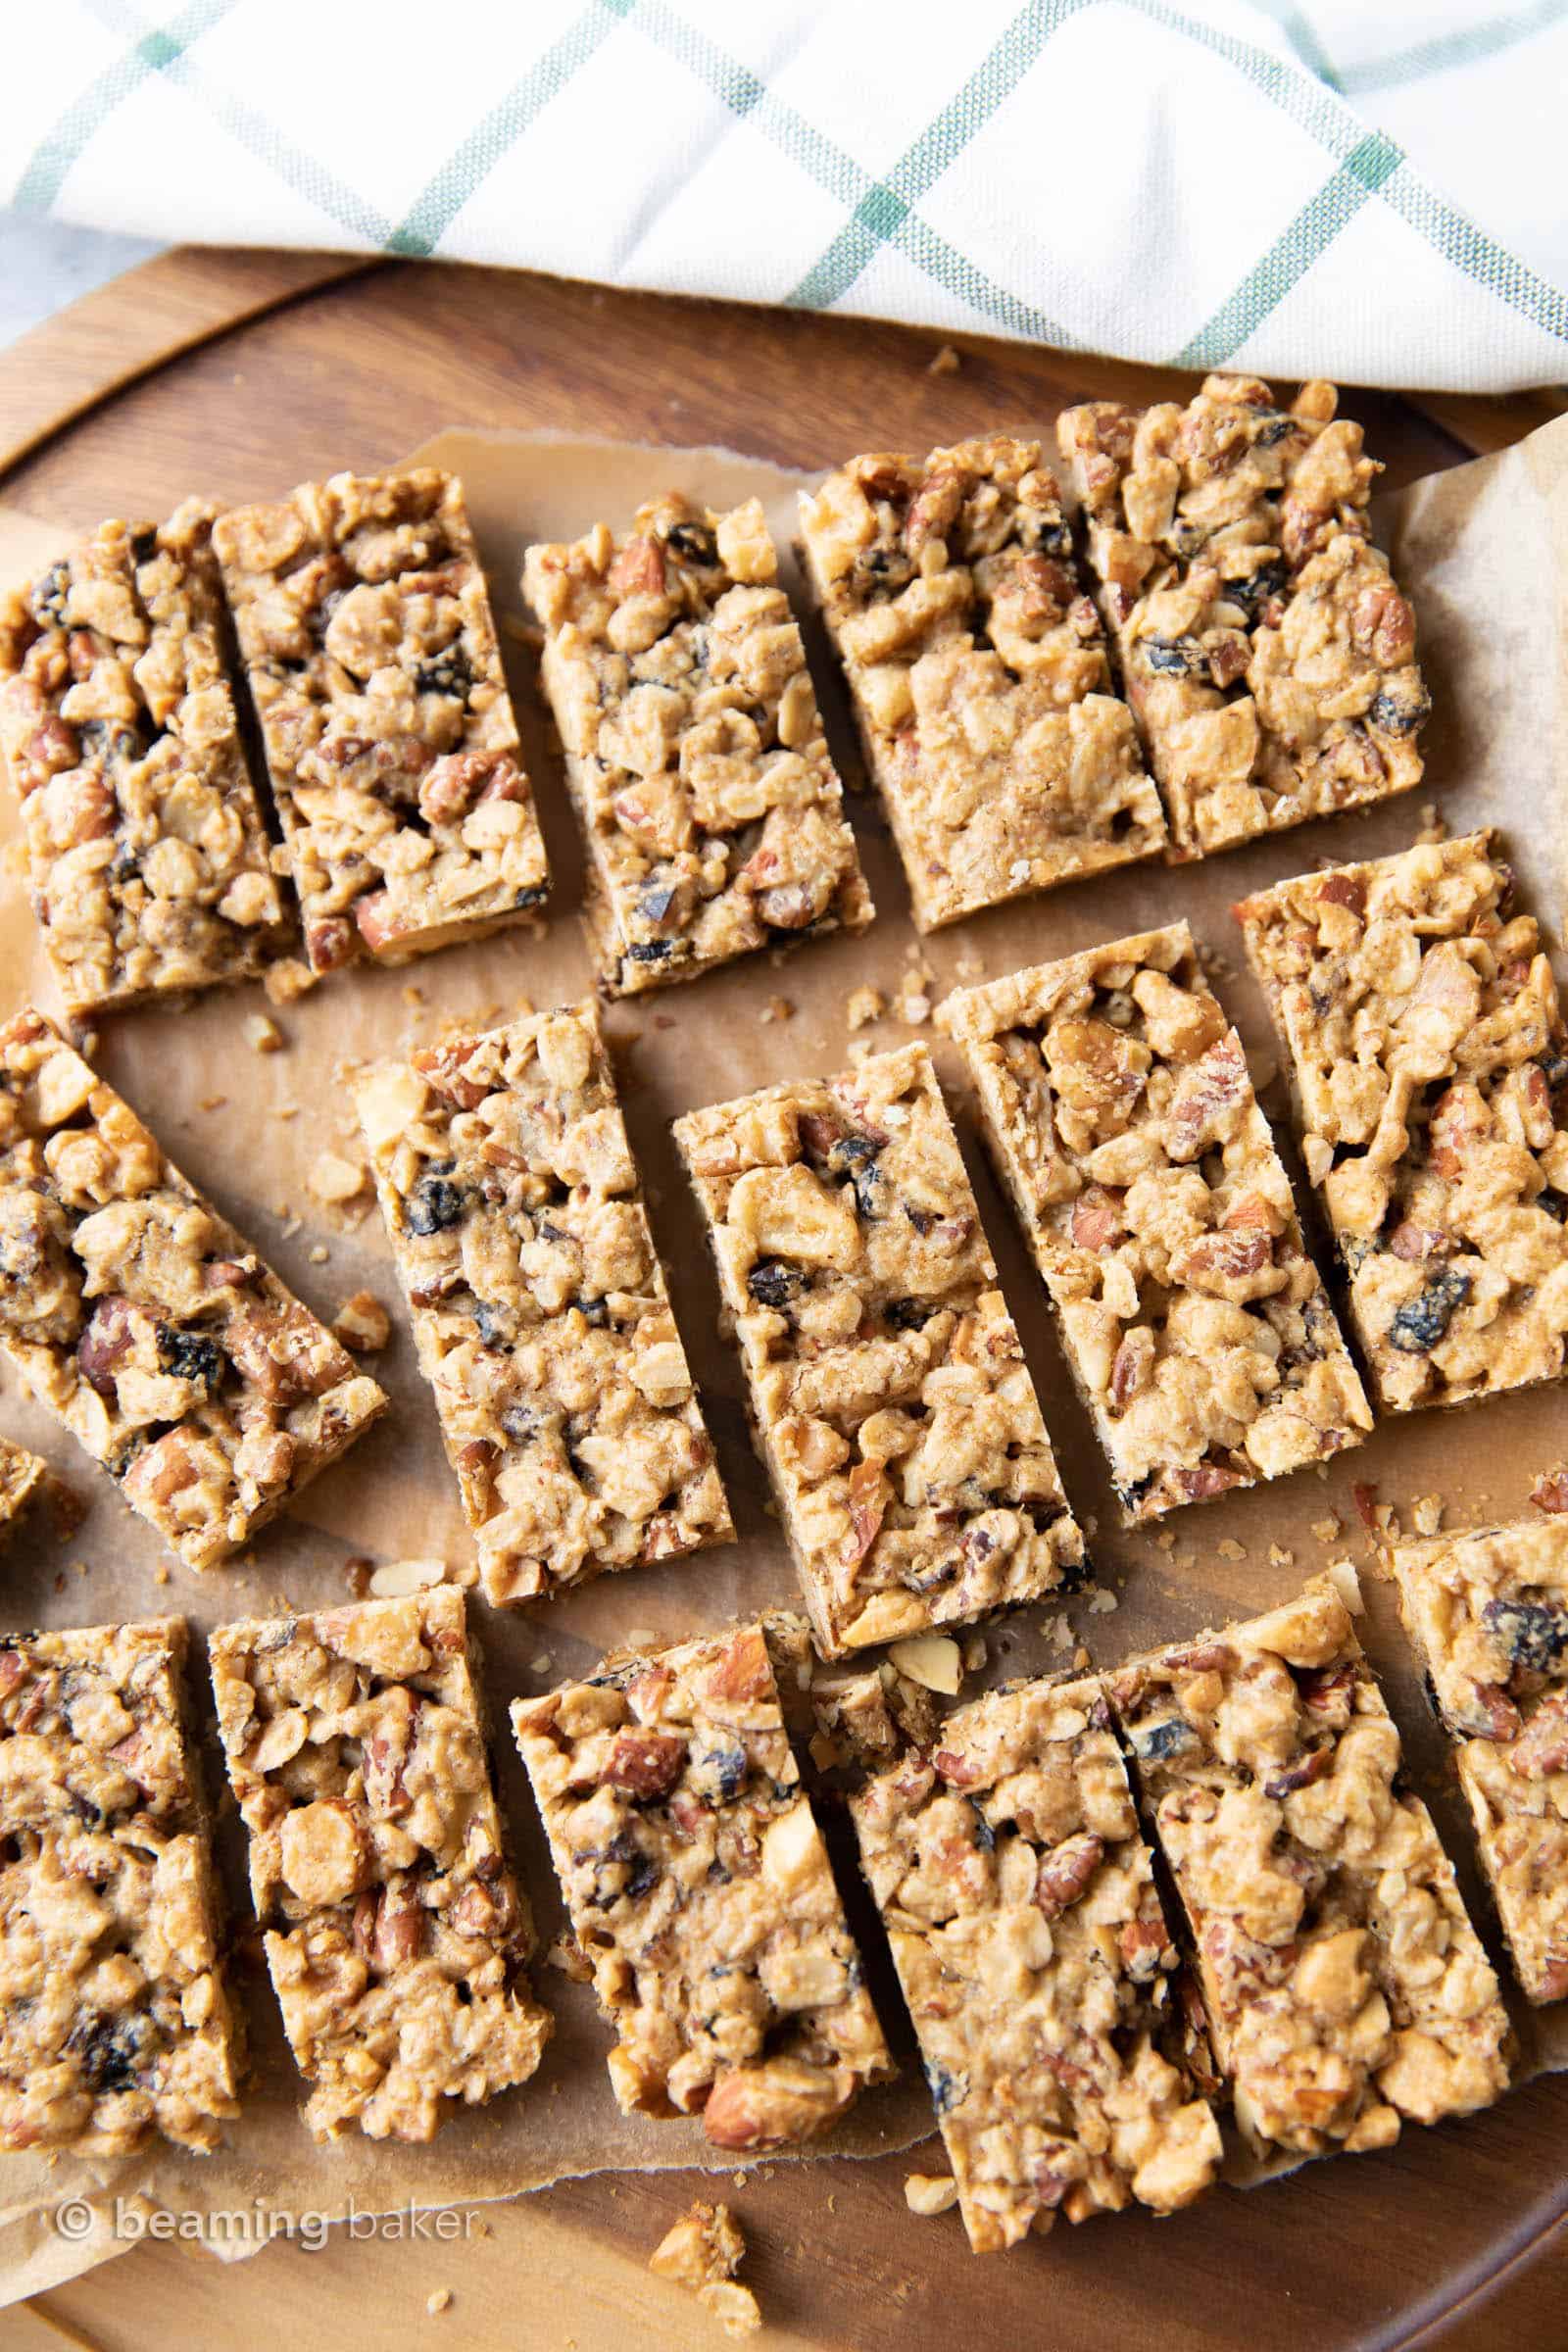 Healthy Granola Bars (V, GF): this healthy homemade granola bars recipe yields soft ‘n chewy granola bars with a crunch! Refined Sugar-Free, Vegan, Gluten Free & made with wholesome nuts and fruits. #GranolaBars #Healthy #Vegan #GlutenFree #Snacks | Recipe at BeamingBaker.com